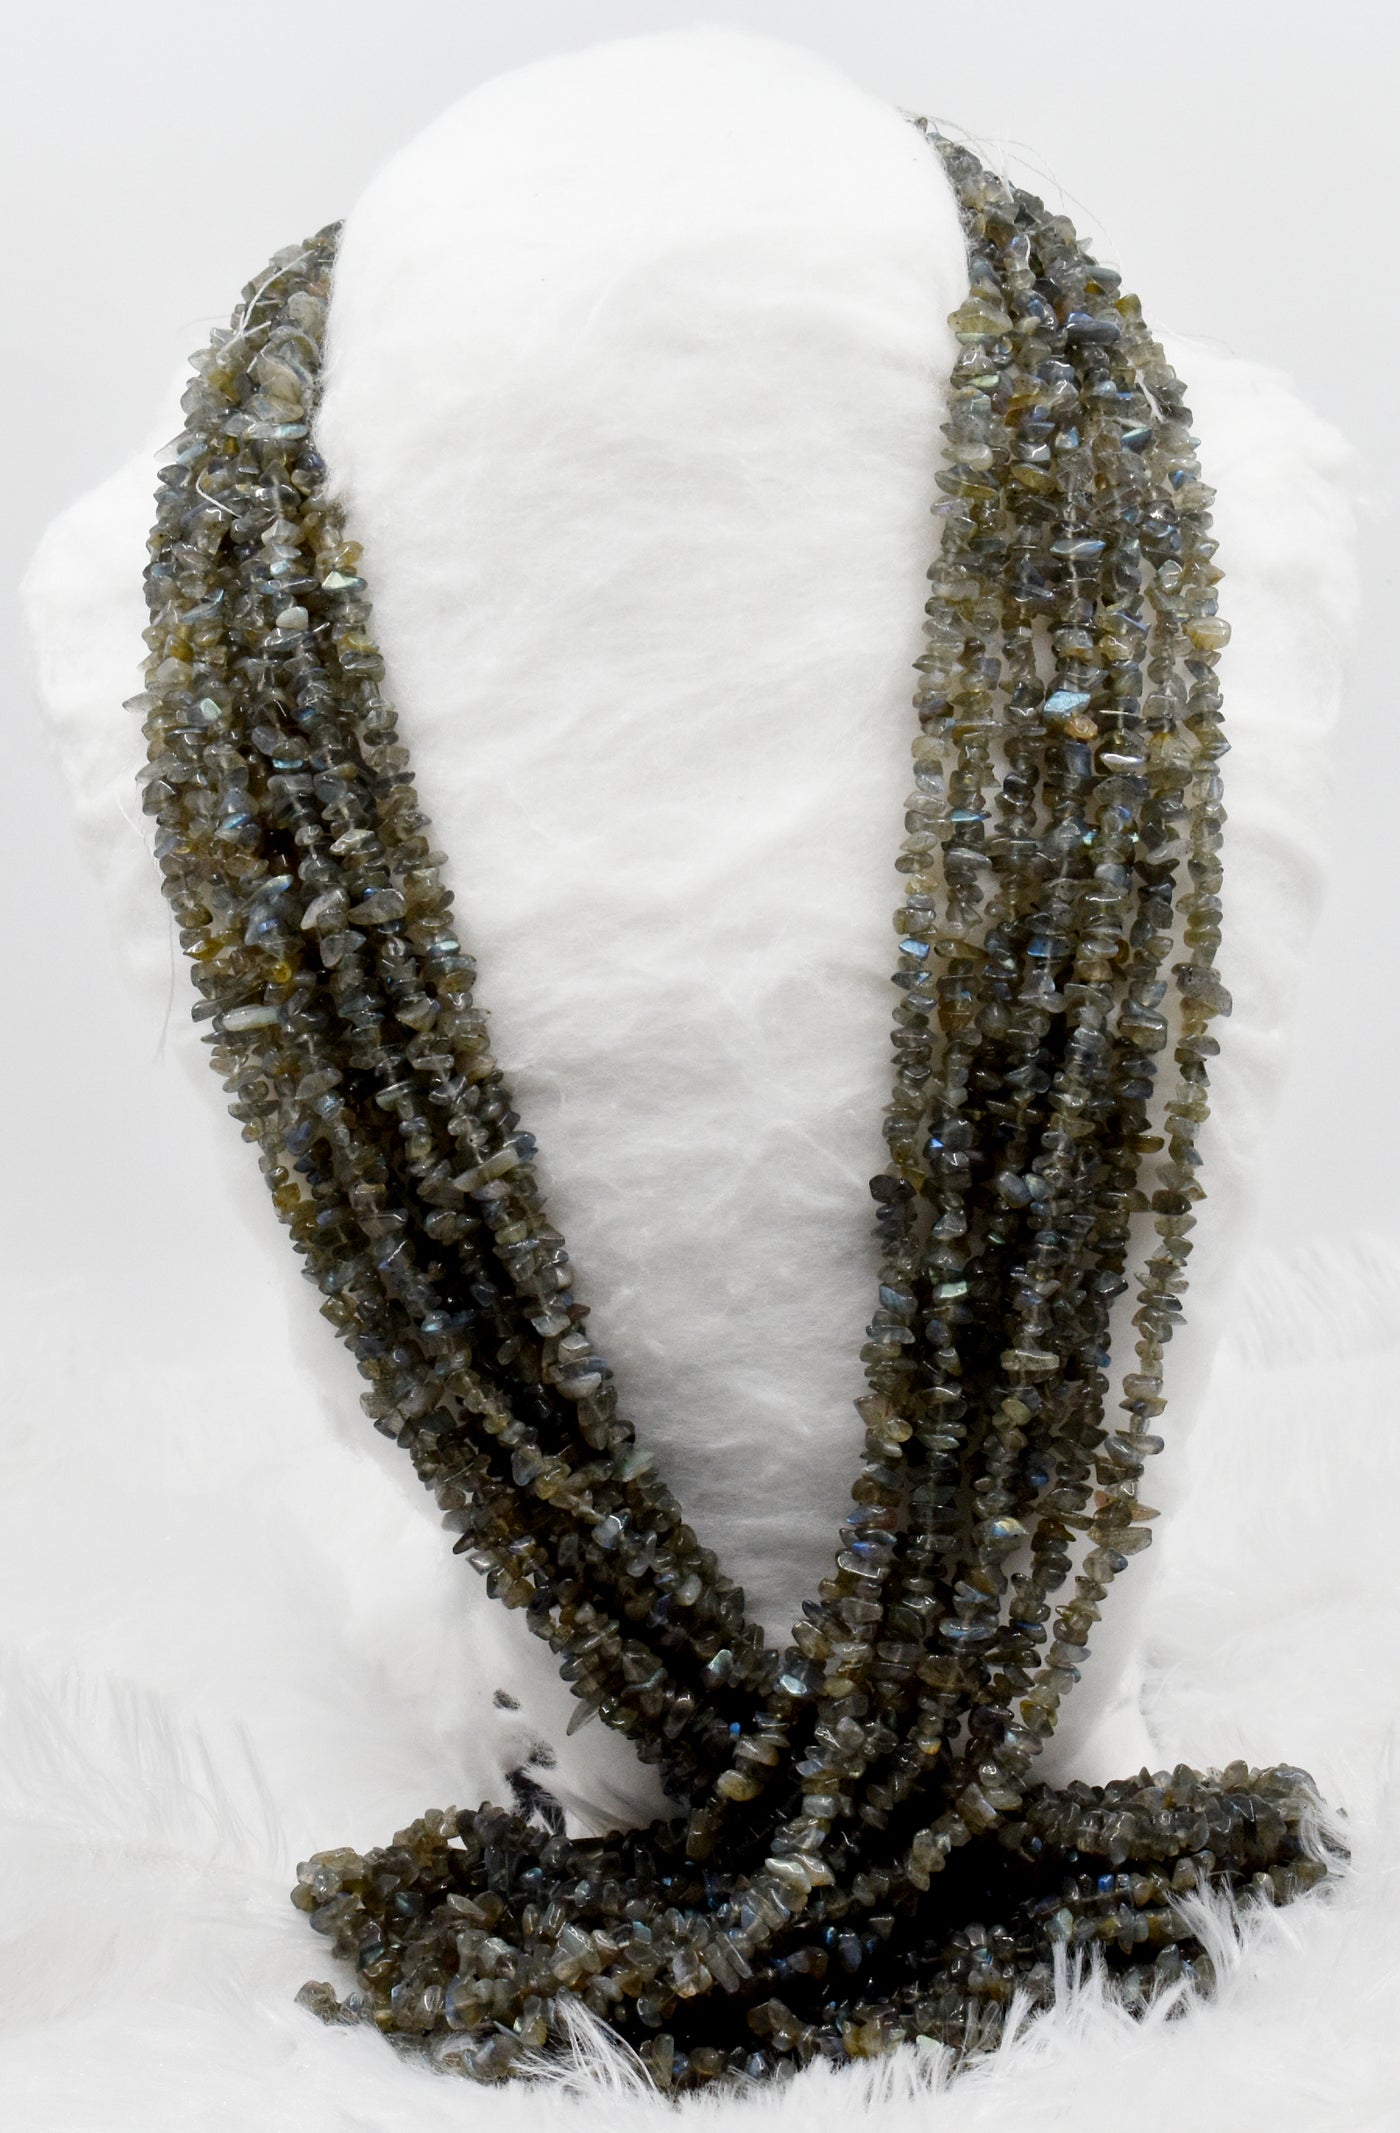 Uncut Raw Labradorite Crystal Chip Beads for Necklace (Expanded Awareness and Intuition)